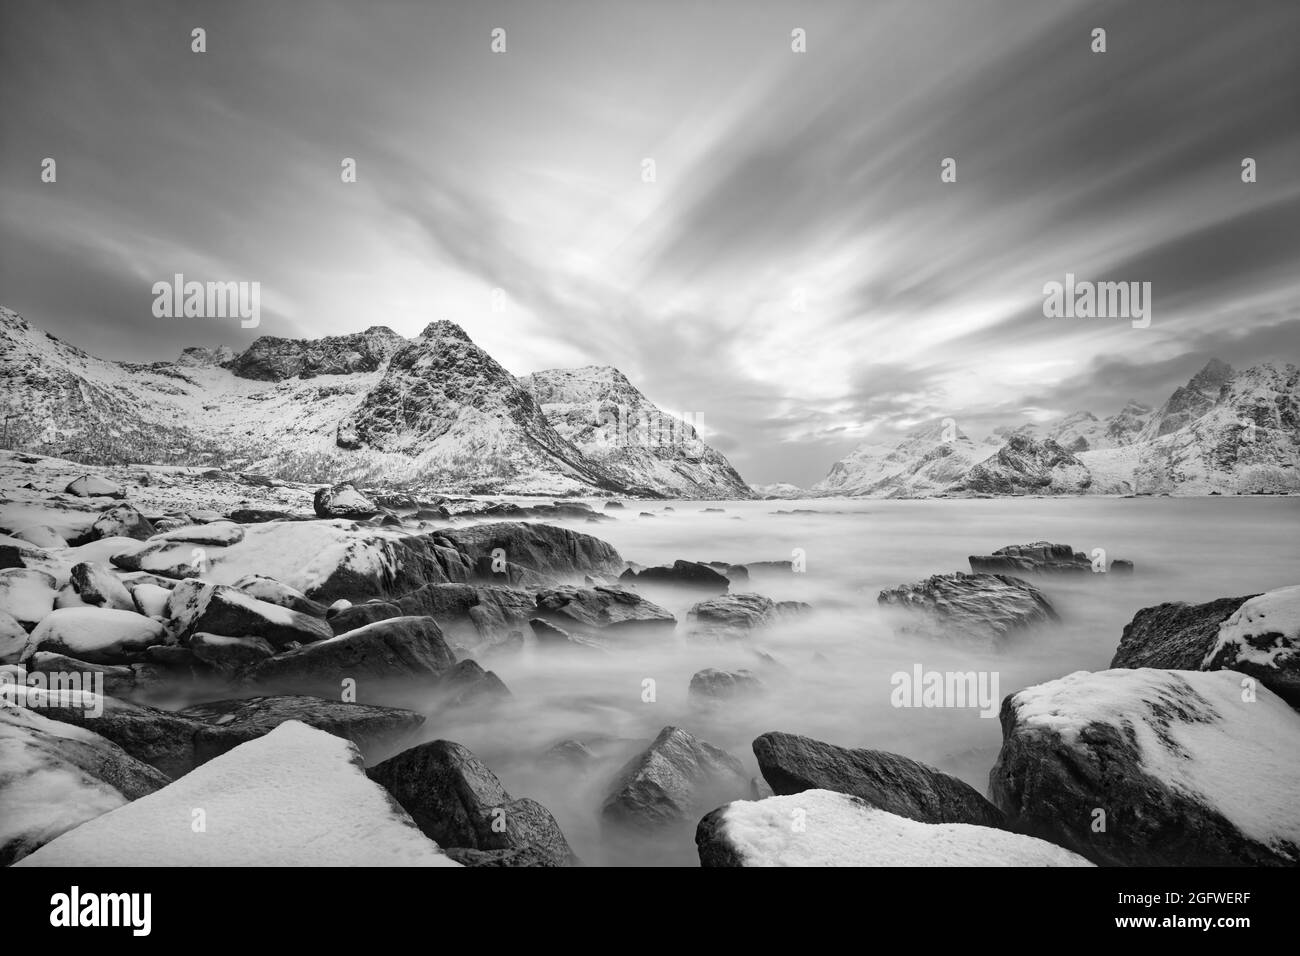 Black and white image of a coastal landscape in winter with water movement between large stones with snow on them, in the background a mountain range Stock Photo